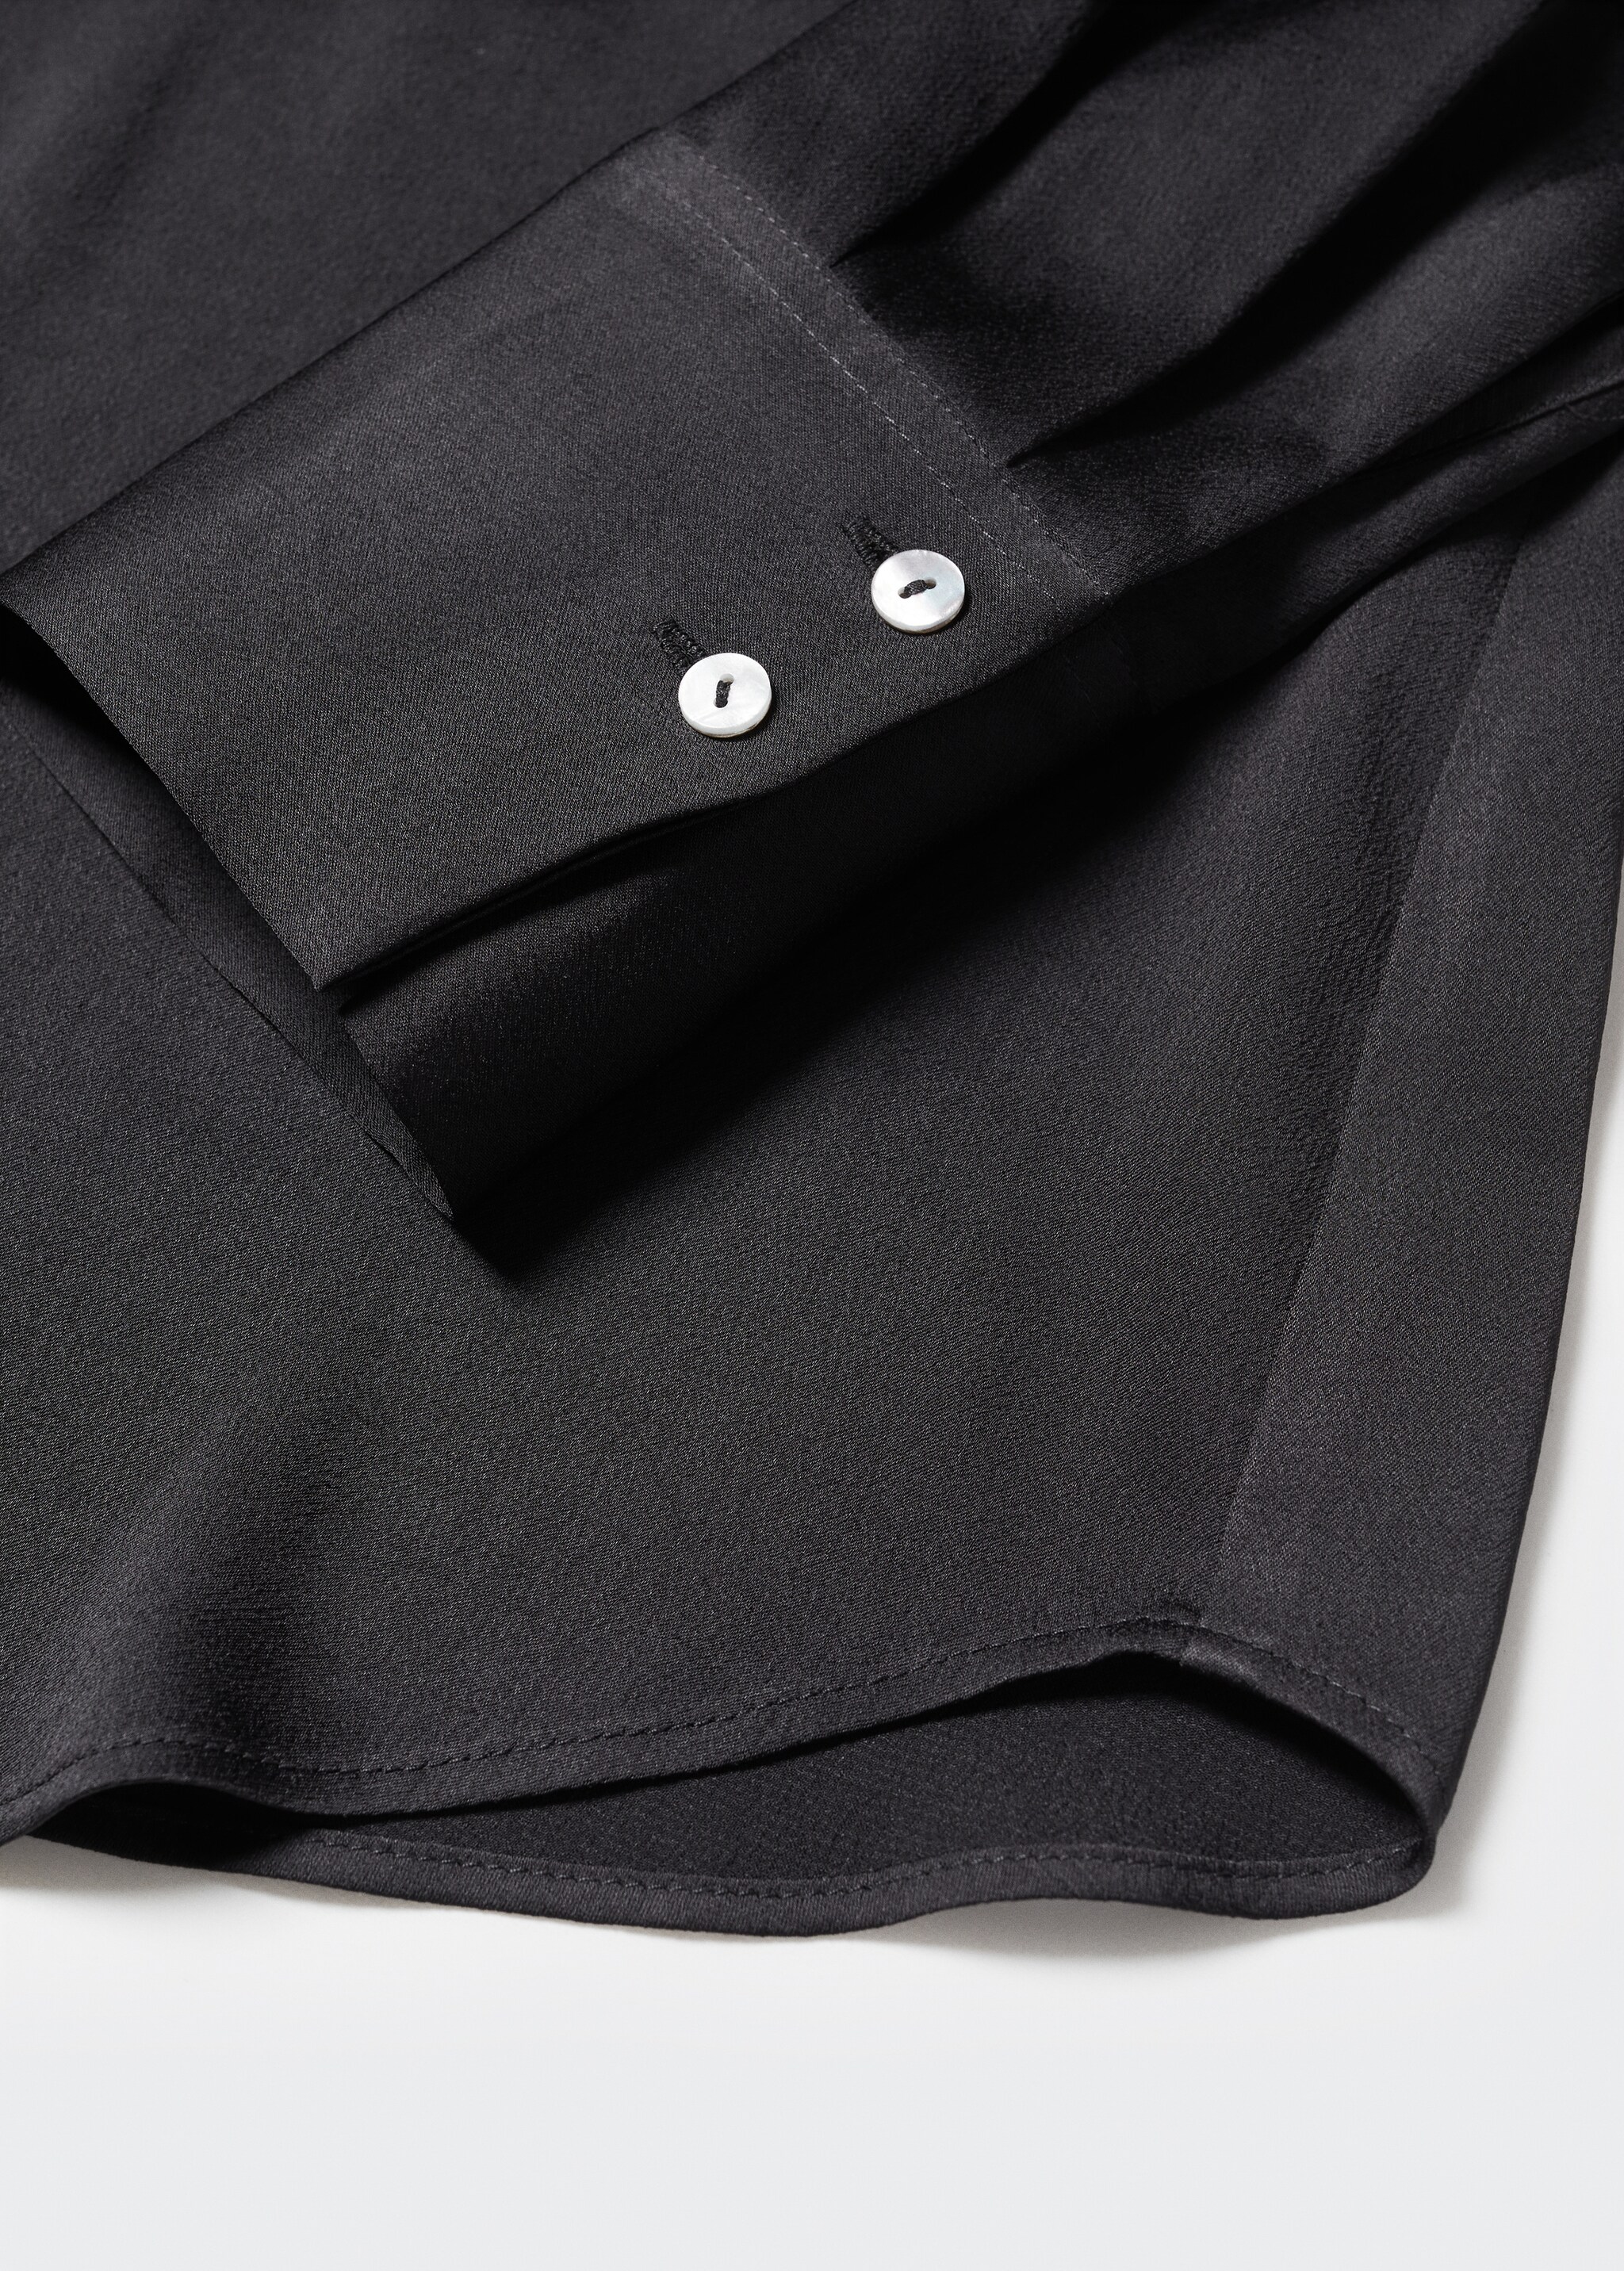 Satin finish flowy shirt - Details of the article 8